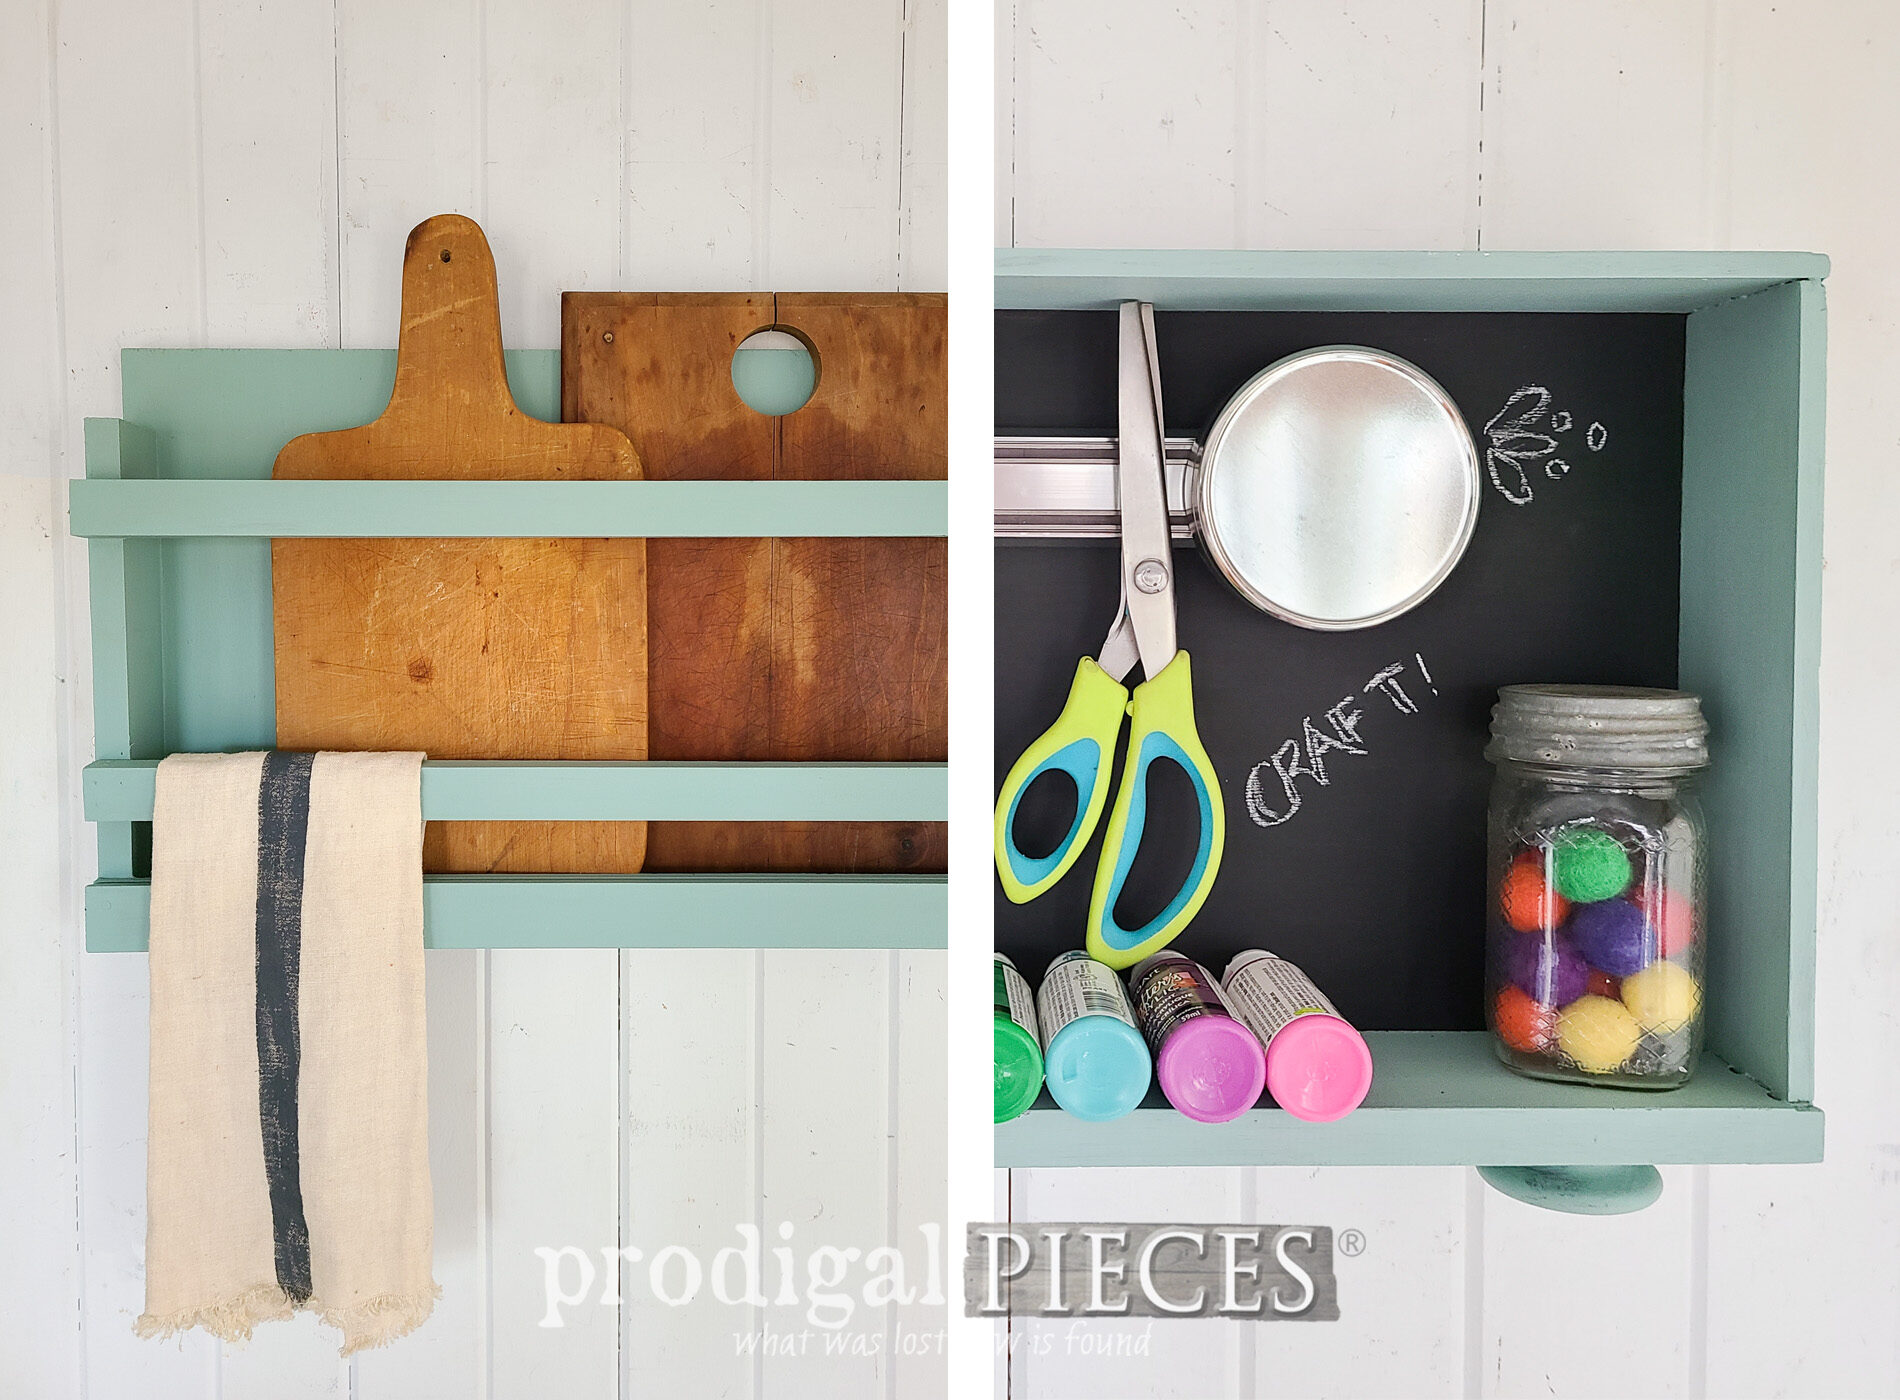 An upcycled vanity is repurposed into functional storage for your home. Take a peek at the DIY by Larissa of Prodigal Pieces | prodigalpieces.com #prodigalpieces #diy #upcycled #repurposed